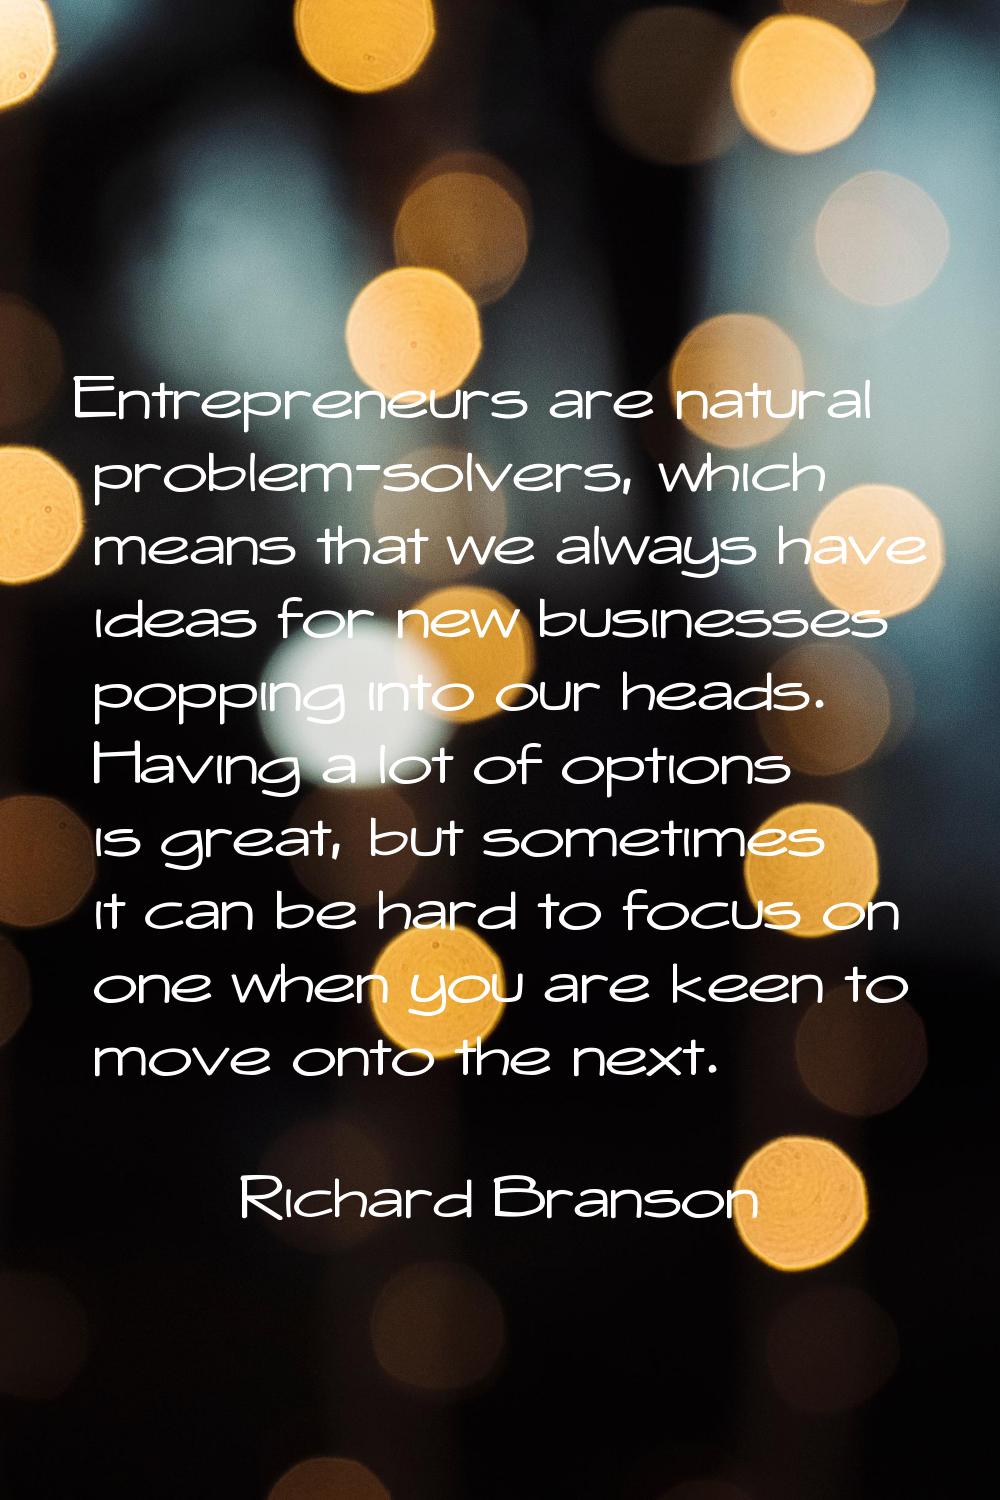 Entrepreneurs are natural problem-solvers, which means that we always have ideas for new businesses